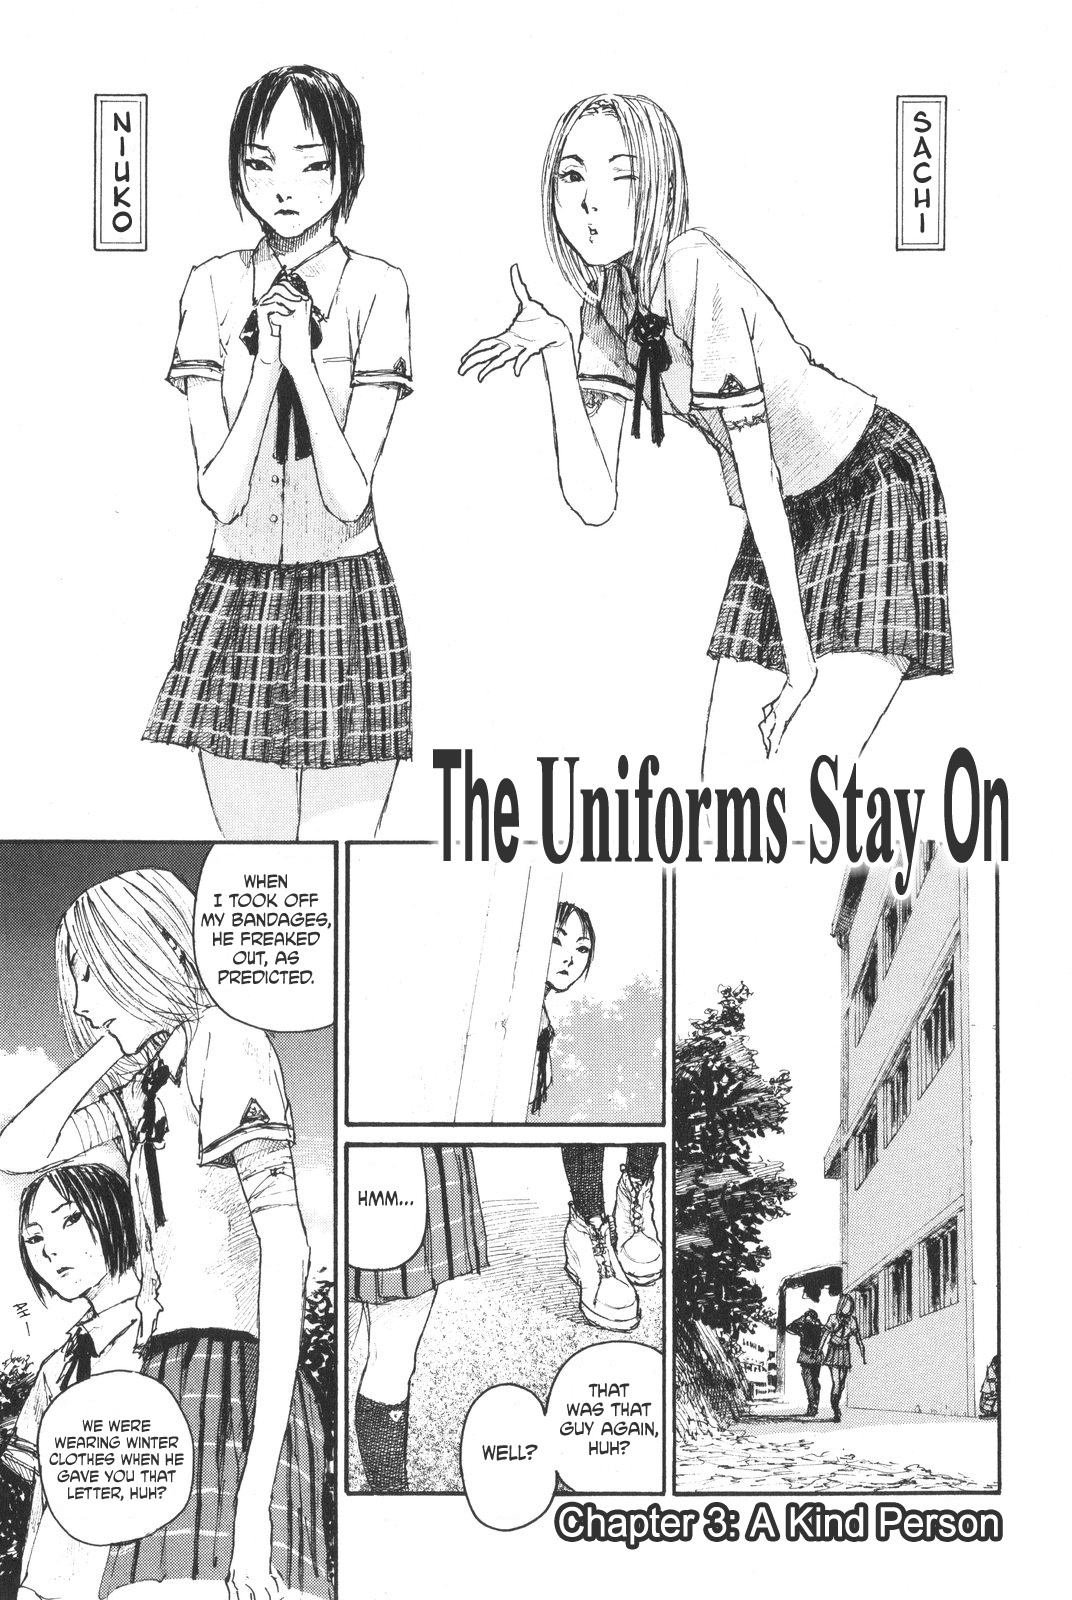 Sister Generator ~Hiroaki Samura Short Stories~ Vol.1 Chapter 4: The Uniforms Stay On Chapter 3: A Kind Person - Picture 1